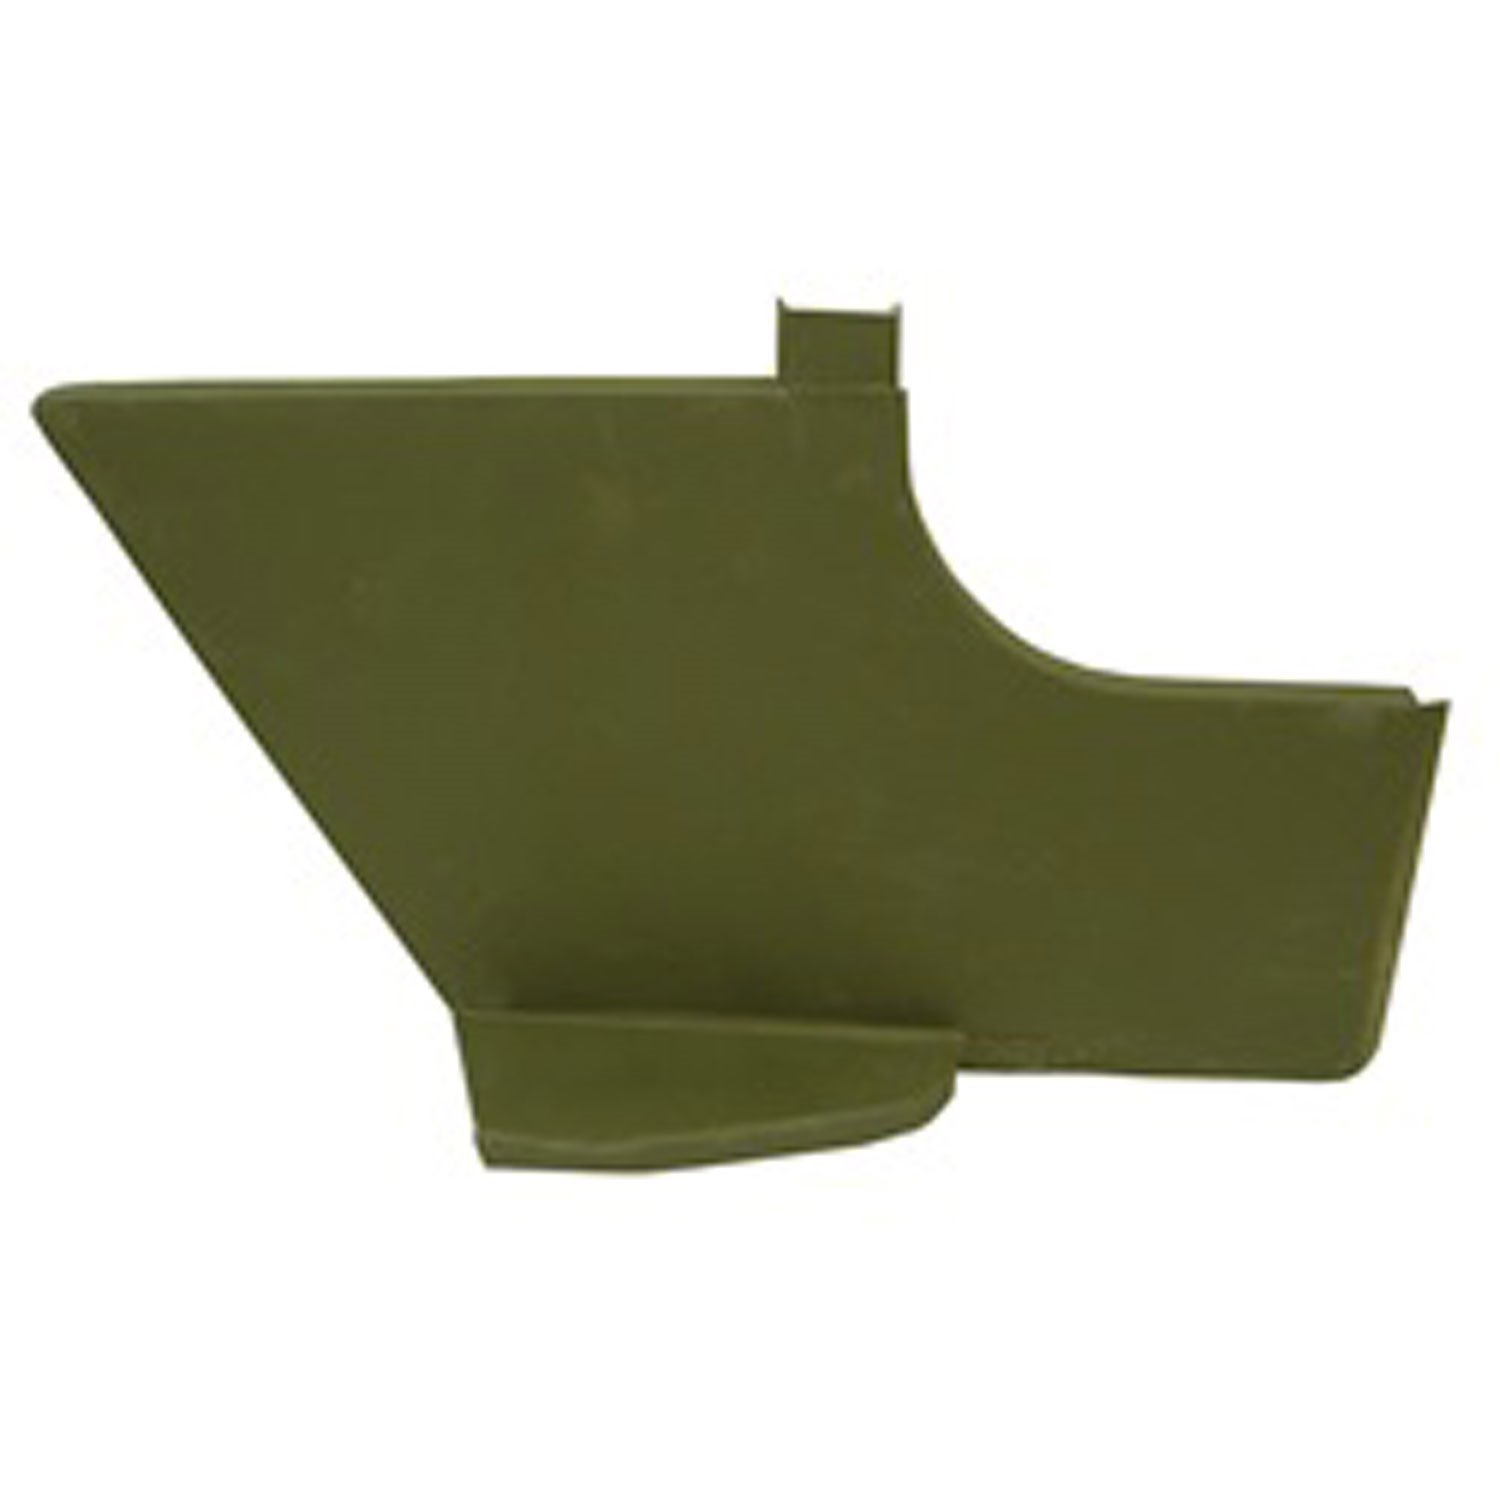 This left cowl side panel from Omix-ADA fits 50-52 Willys M38 and includes the step.